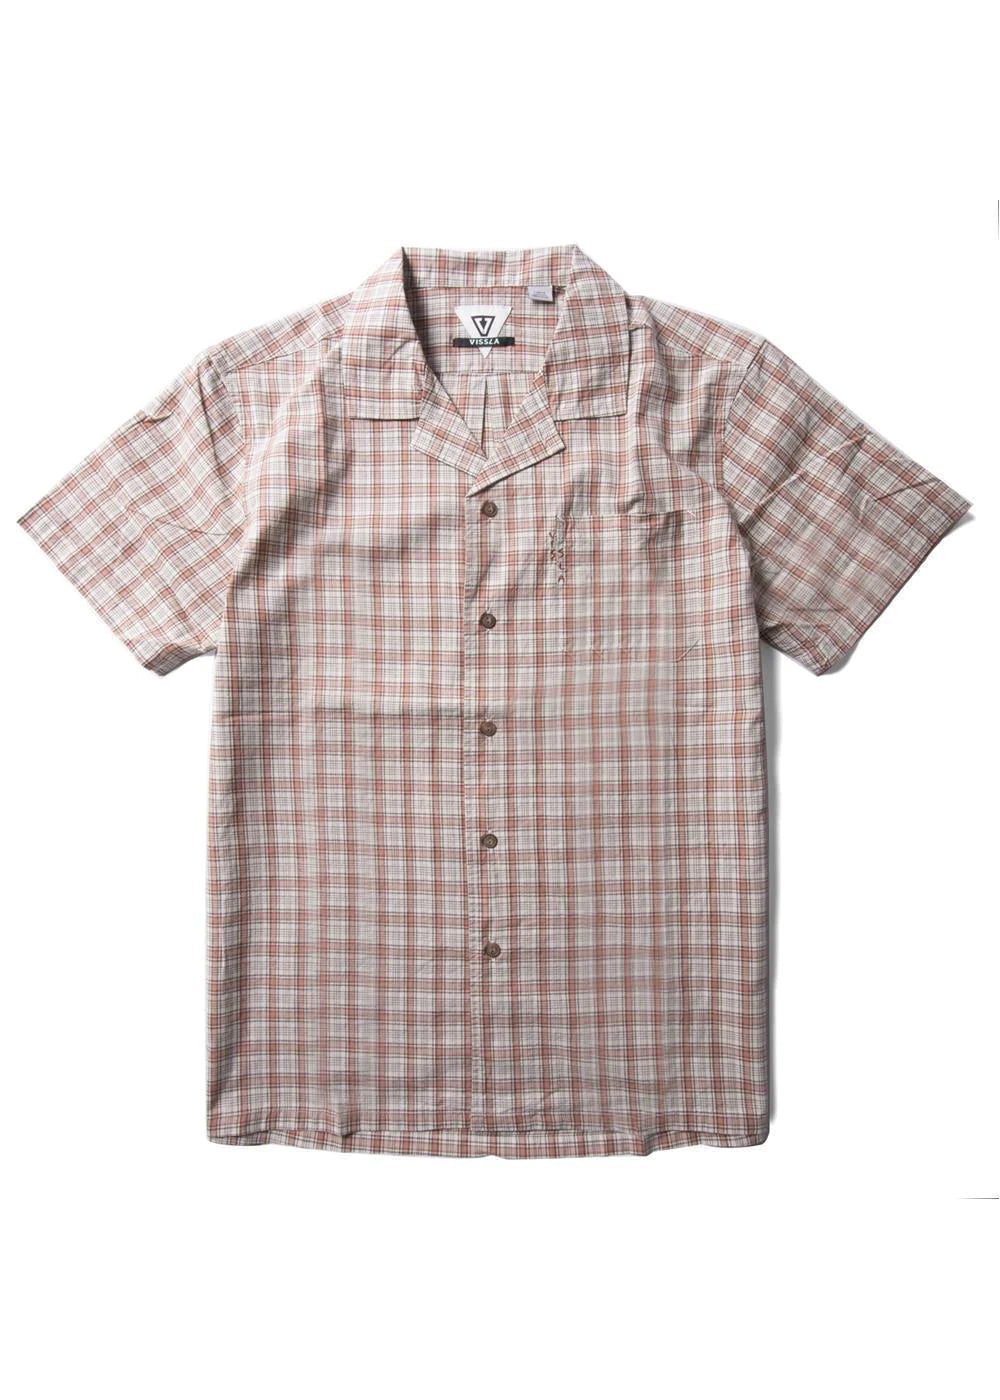 Vissla Undefined Lines Eco Ss Shirt - Clay